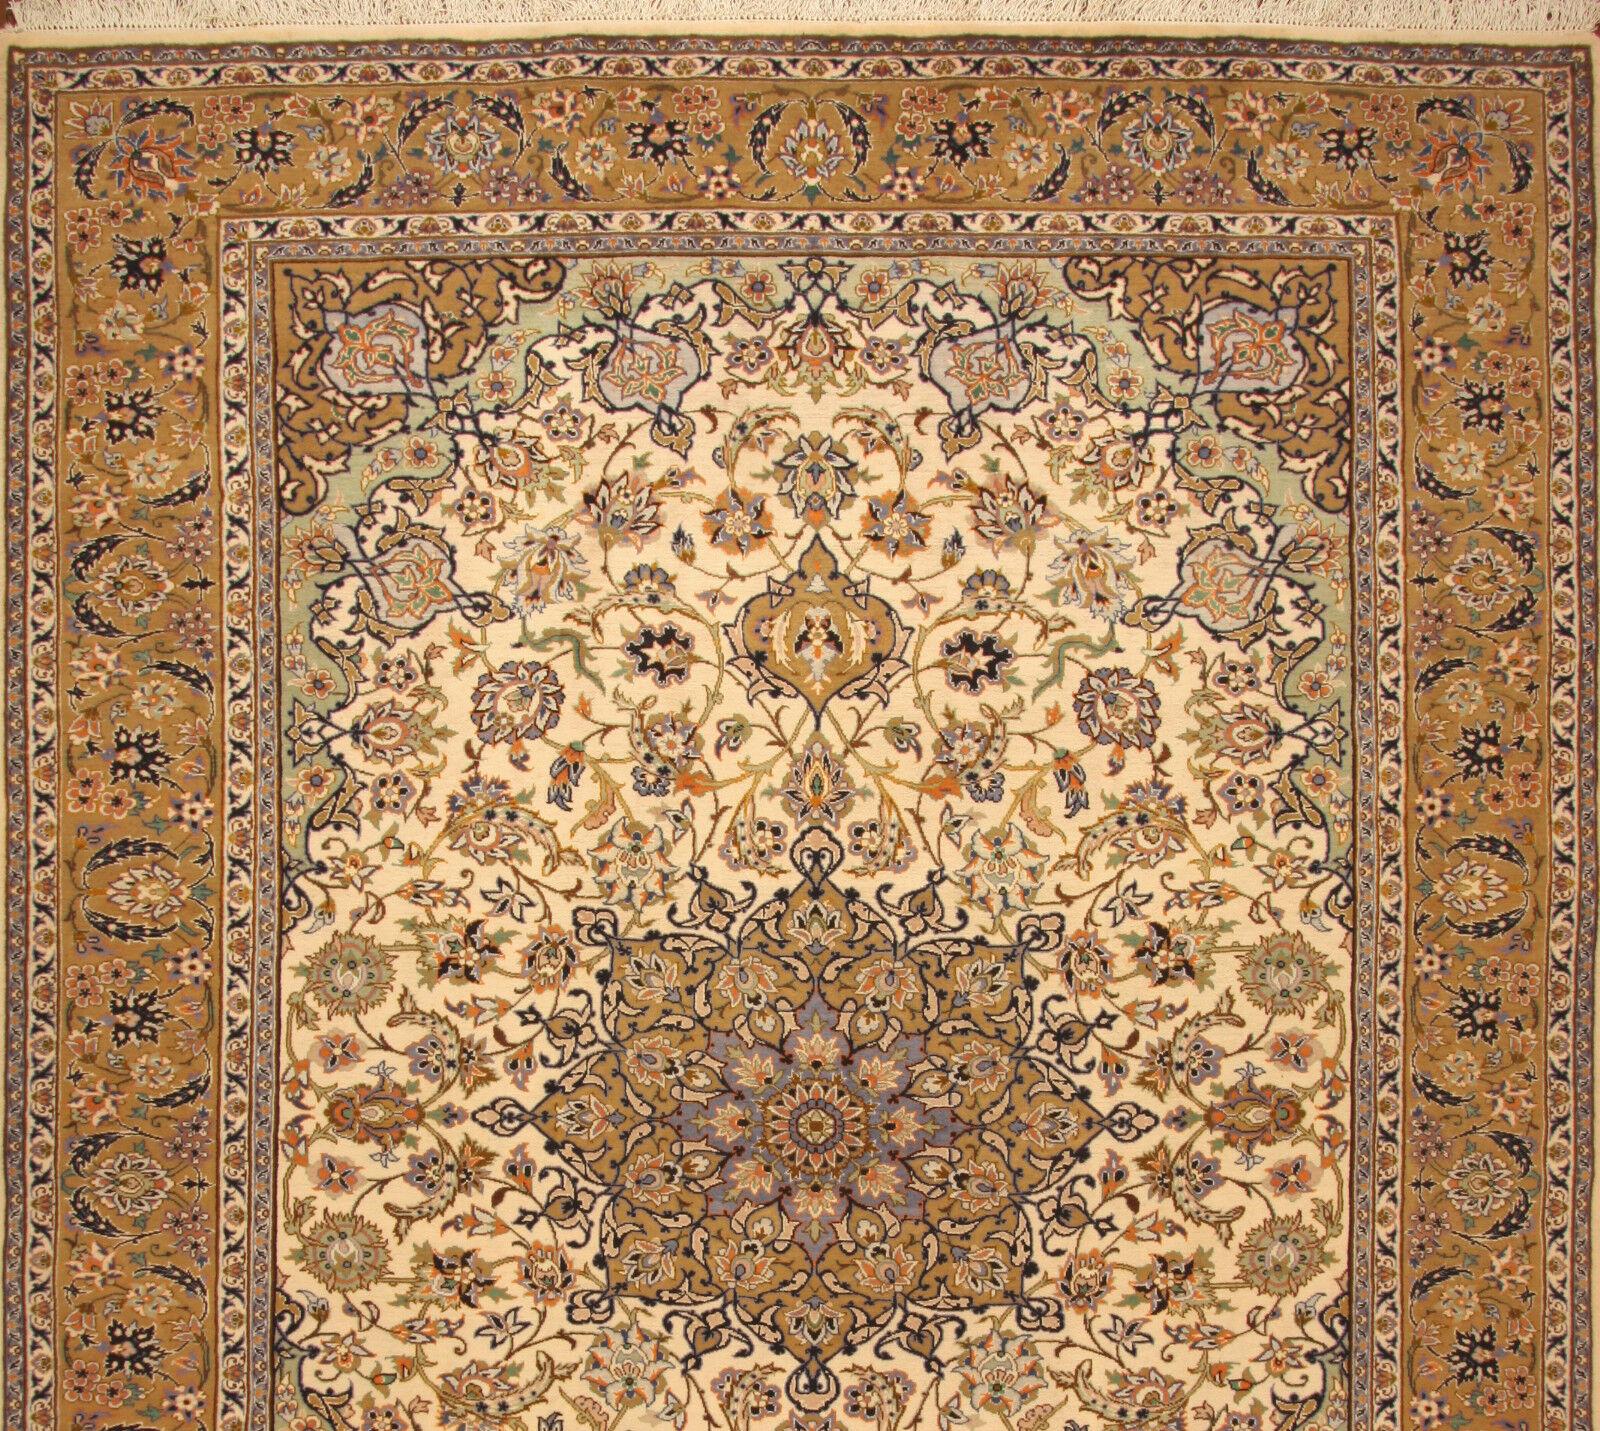 Handmade Contemporary Isfahan Rug 9.6' x 12.7' (295cm x 390cm), 2000s - 1T02 In Good Condition For Sale In Bordeaux, FR